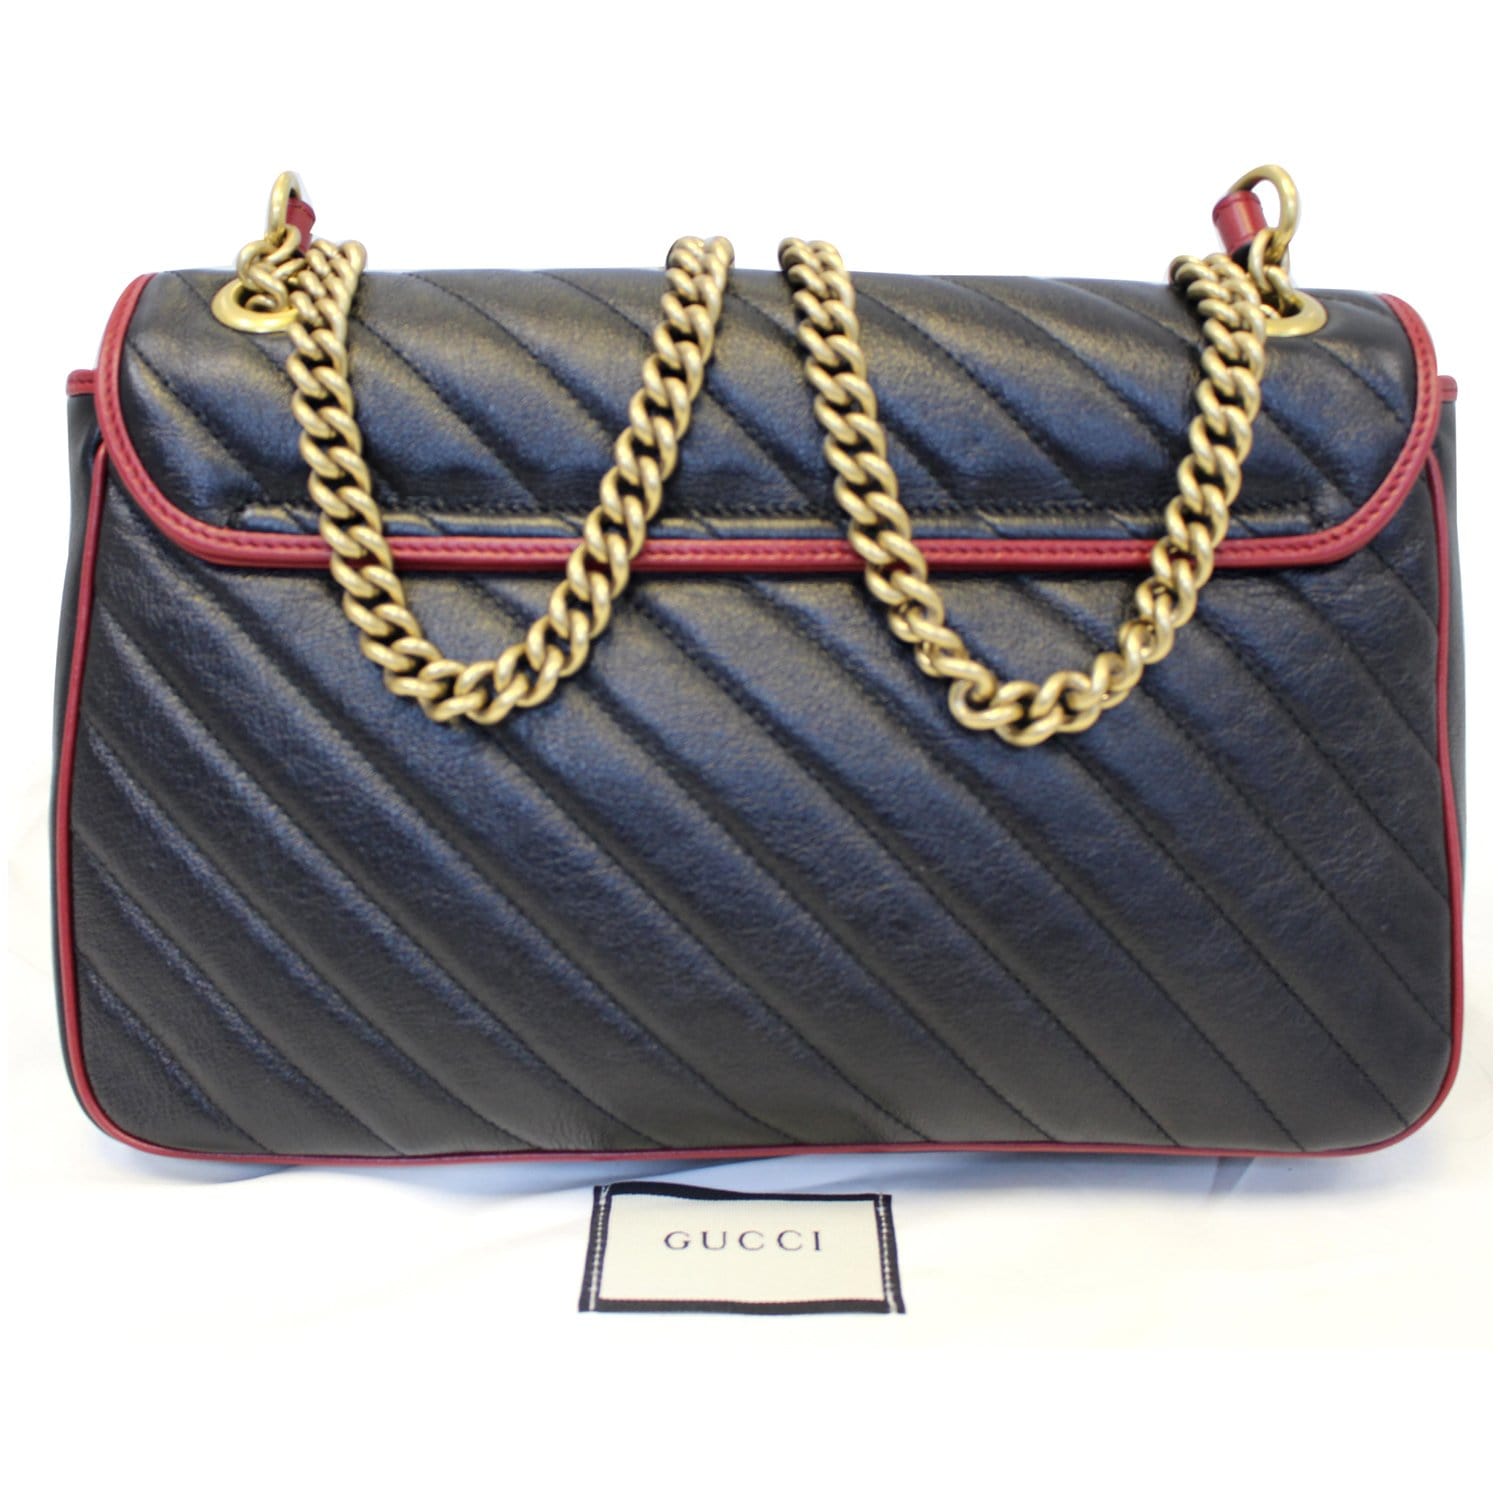 GG Marmont Leather Shoulder Bag in Red - Gucci